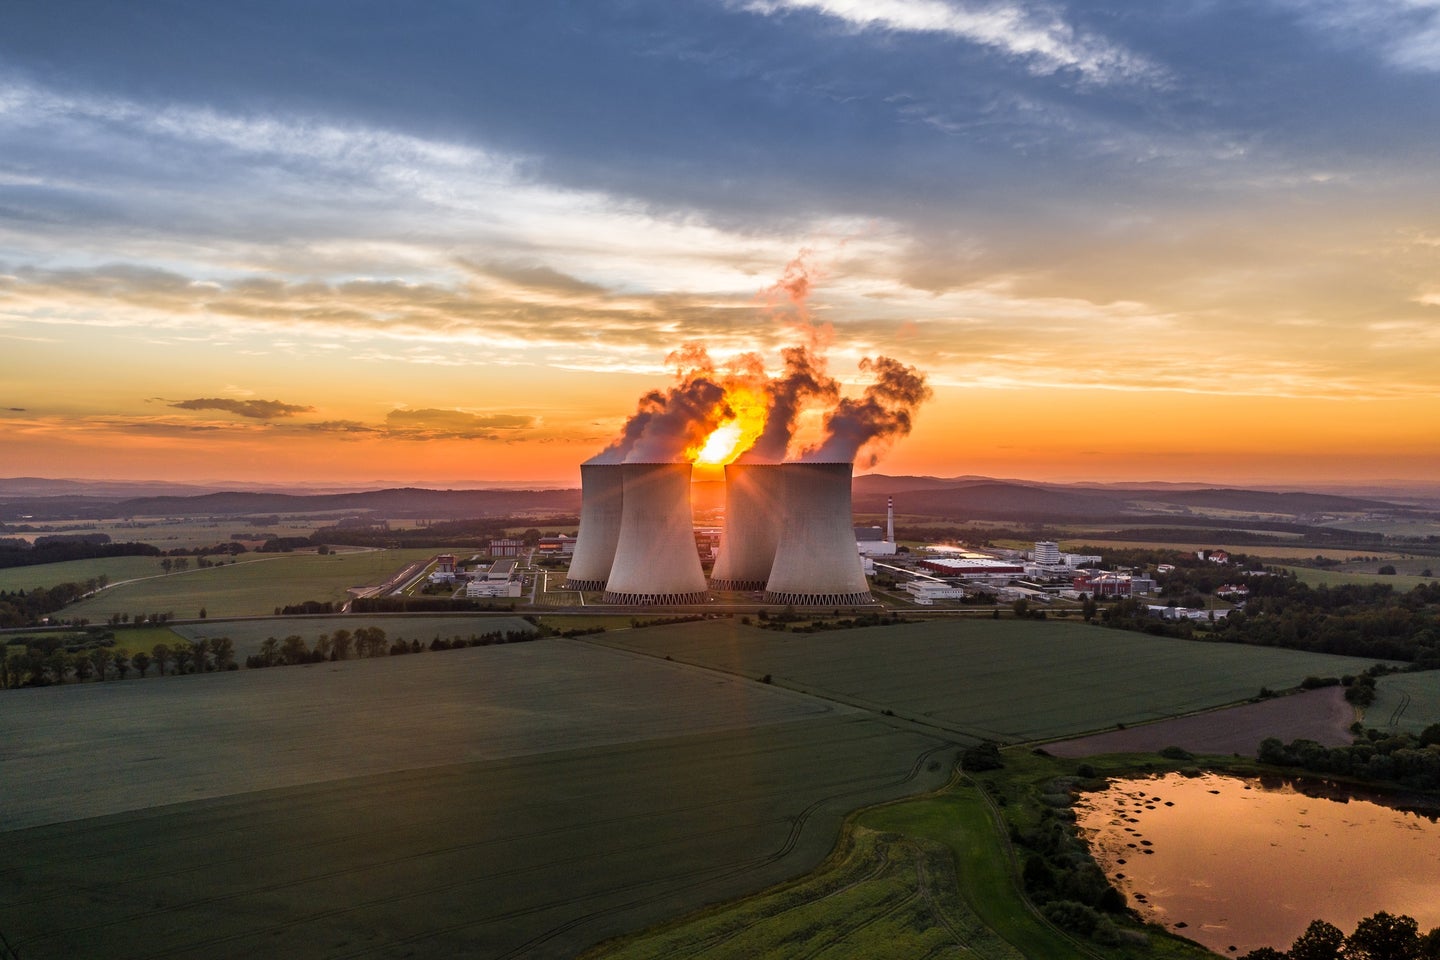 Smoke rising from Temelin Nuclear Power Plant in Czech Republic against the setting sun